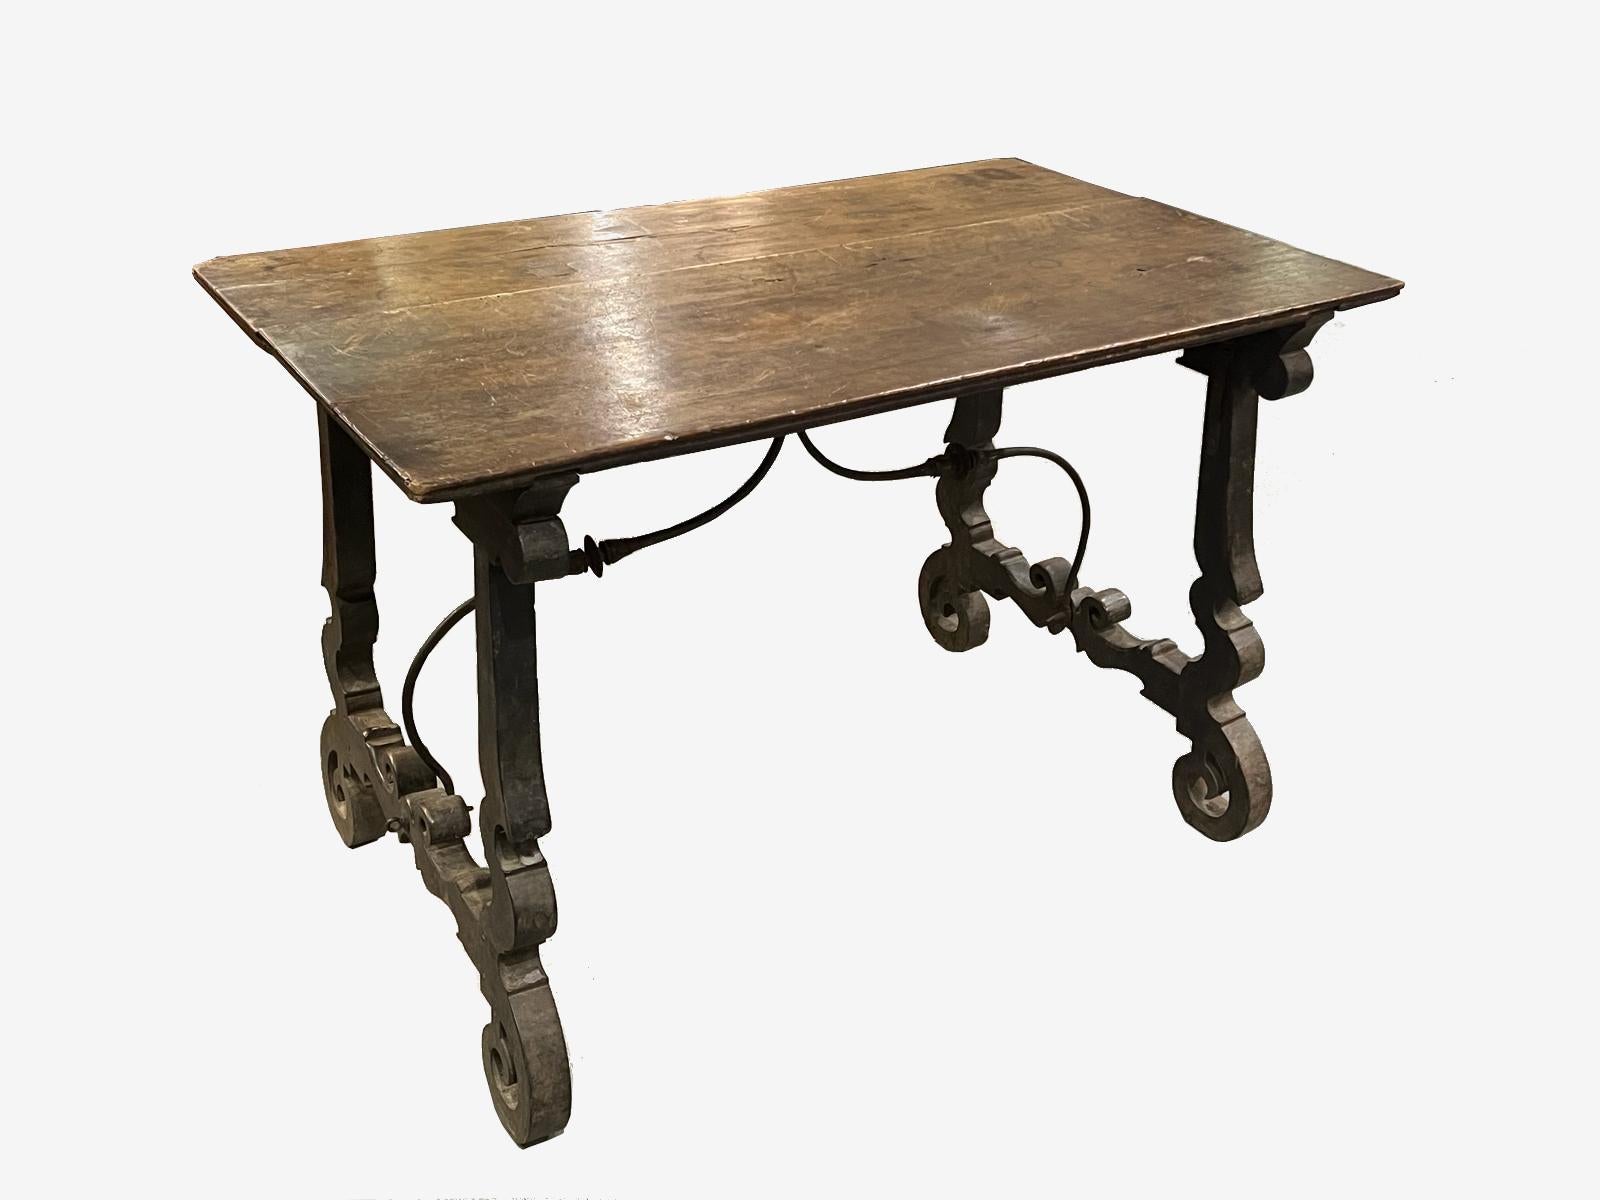 Genuine Spanish table from the 1600s with folding trestle in first patina.

Original antique Spanish table
Late 1600s Spanish table in first patina, in excellent overall condition and of excellent craftsmanship.
Original antique Spanish table in